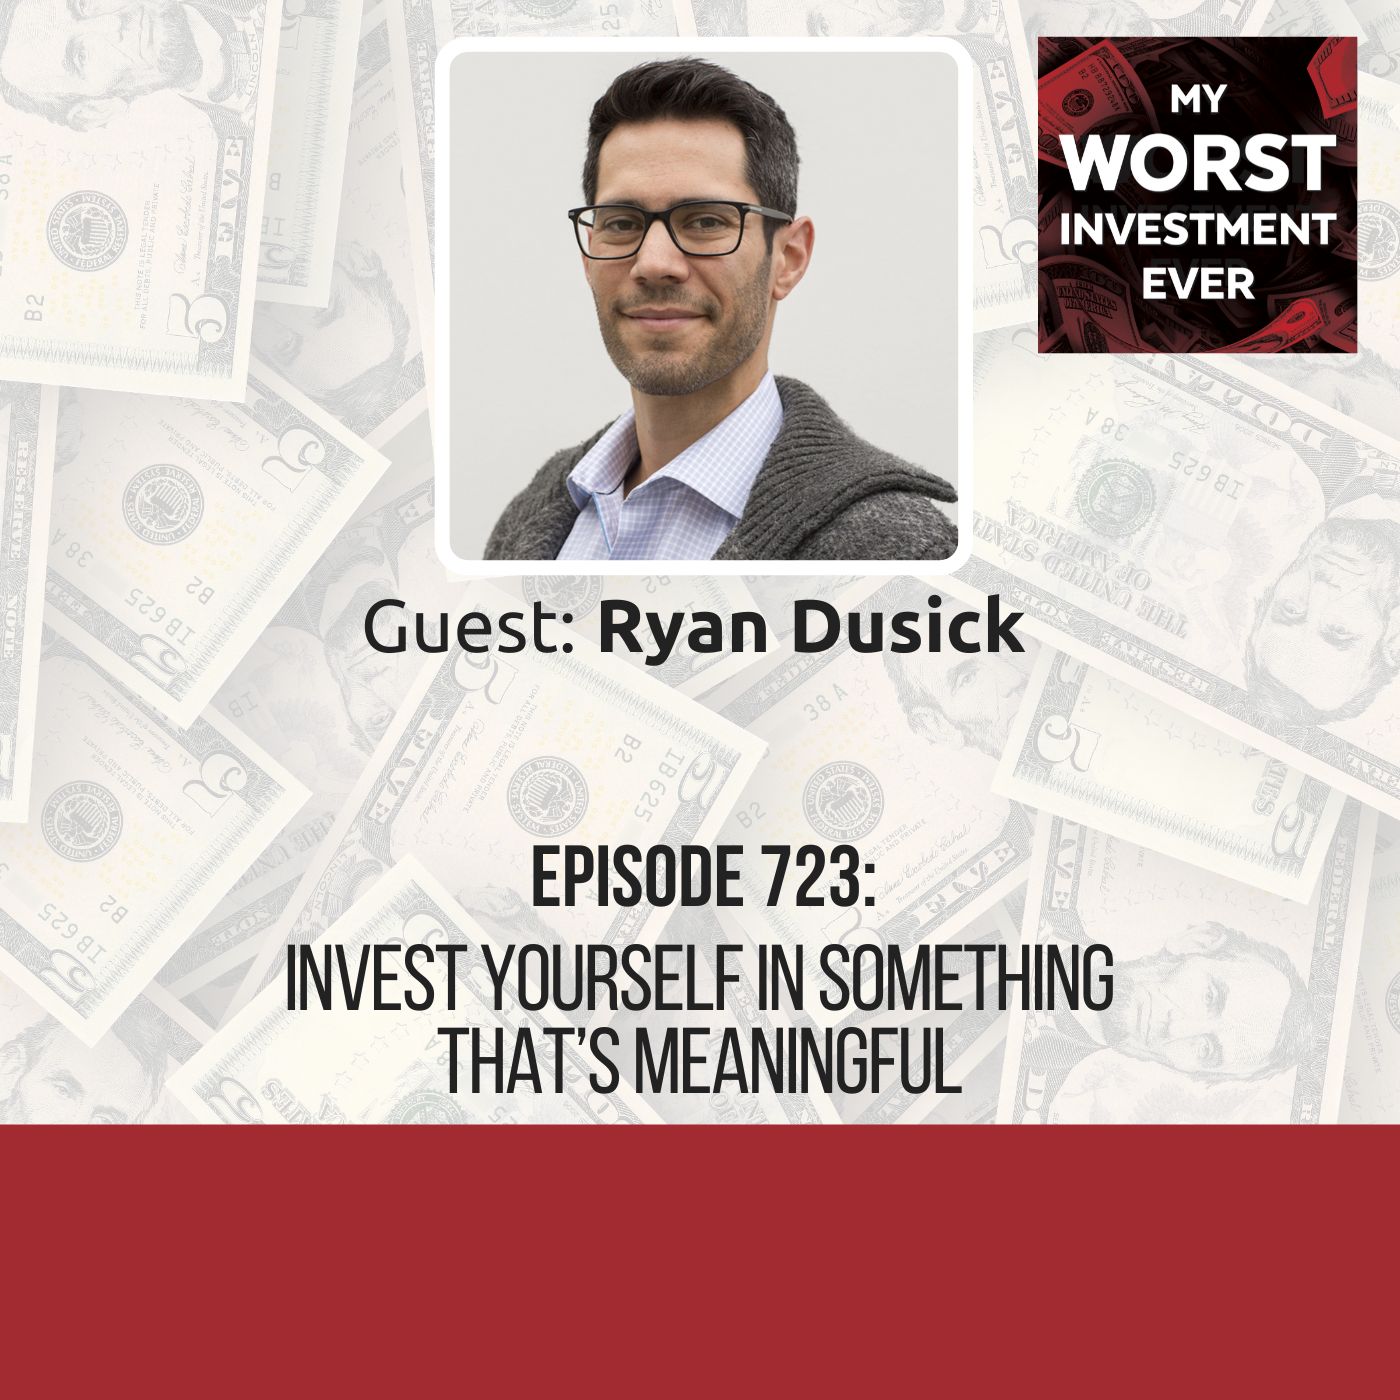 Ryan Dusick – Invest Yourself in Something That’s Meaningful